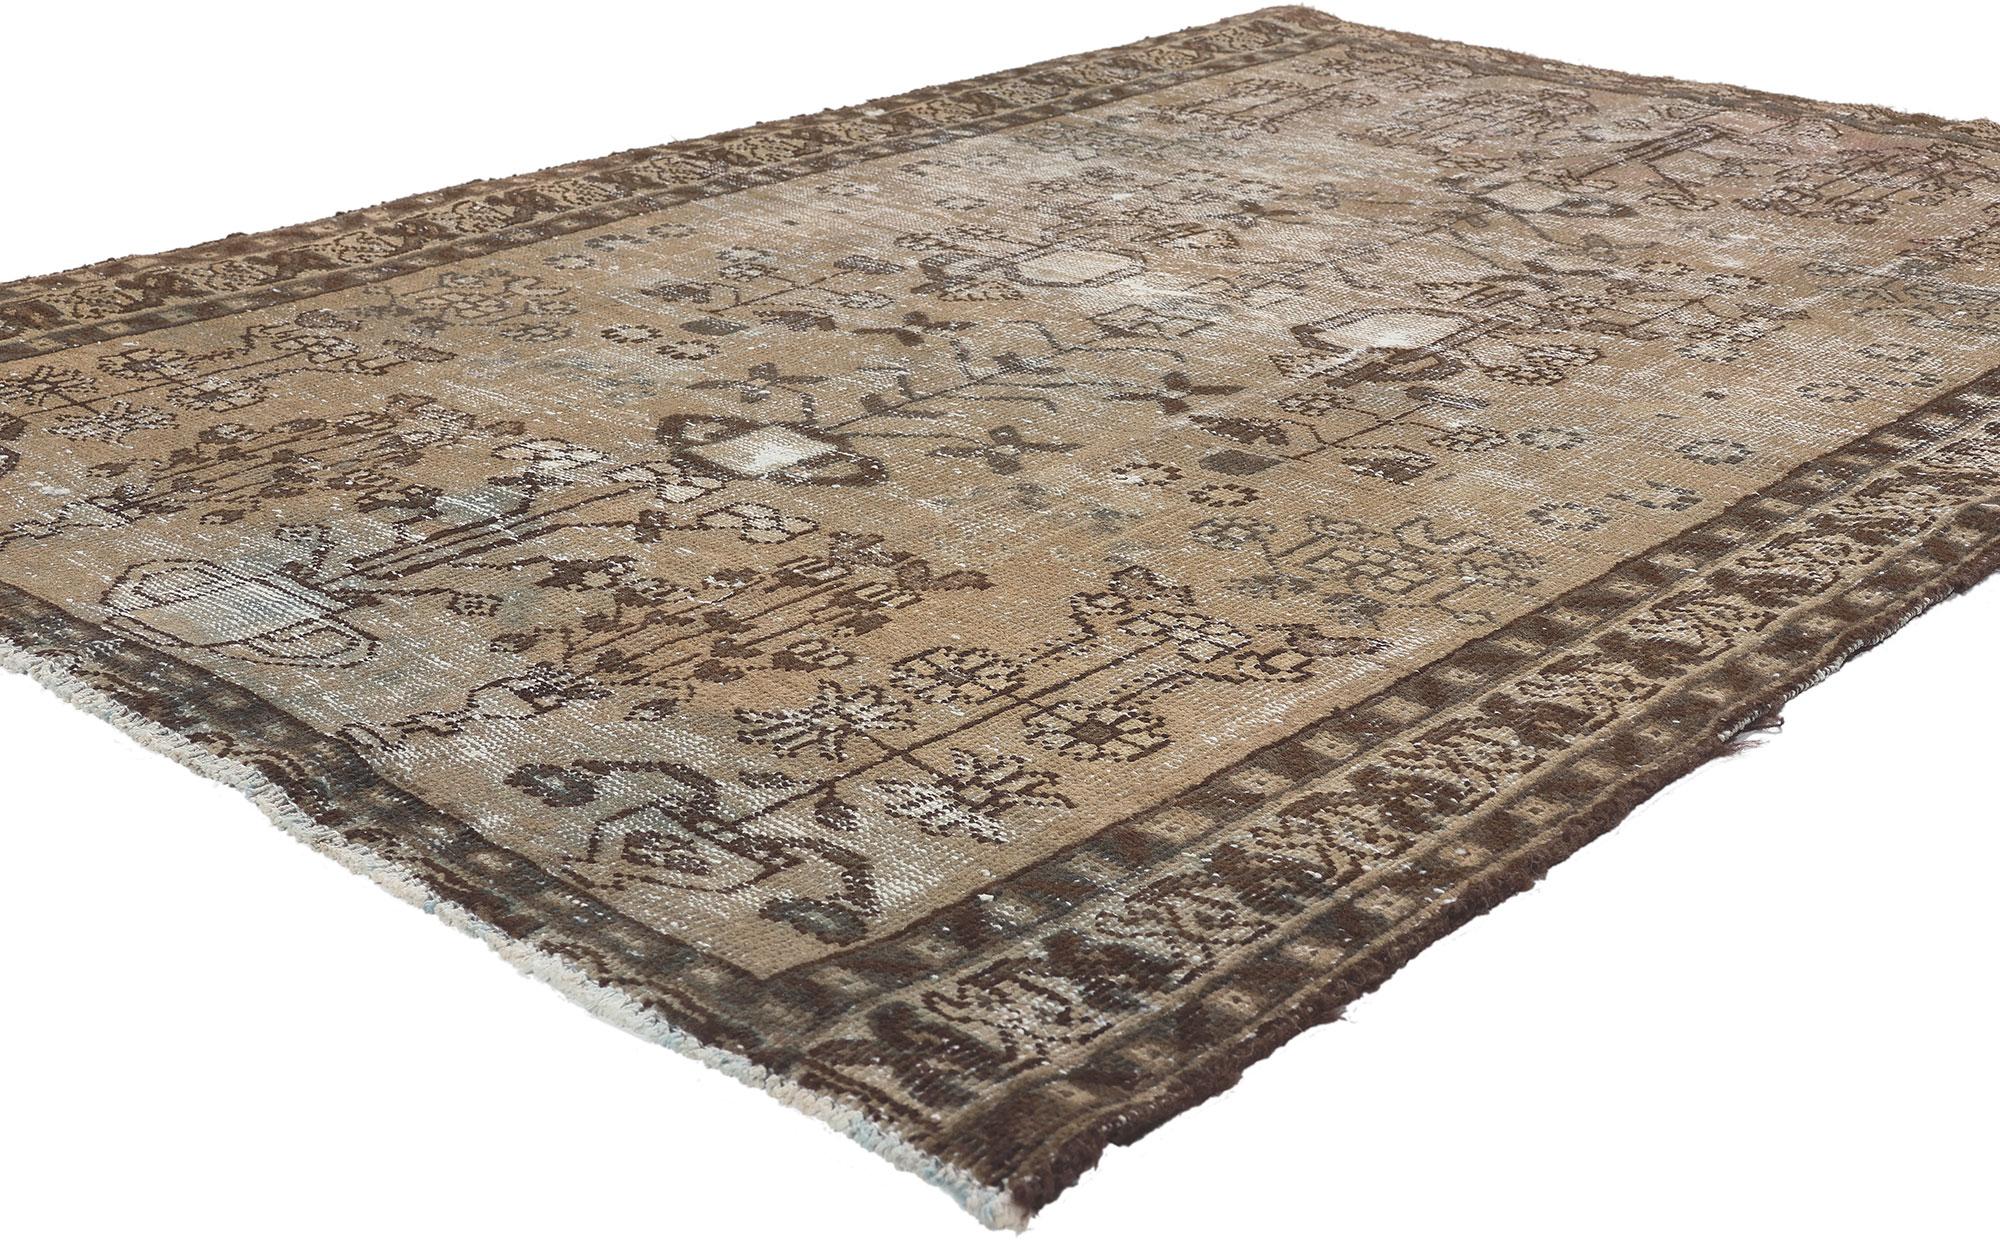 78572 Distressed Antique Persian Bakhtiari Rug, 04'03 x 05'11. 
Emanating rustic sensibility and weathered bucolic charm, this small antique Persian Bakhtiari rug is a captivating vision of woven rugged beauty. The distressed floral design and